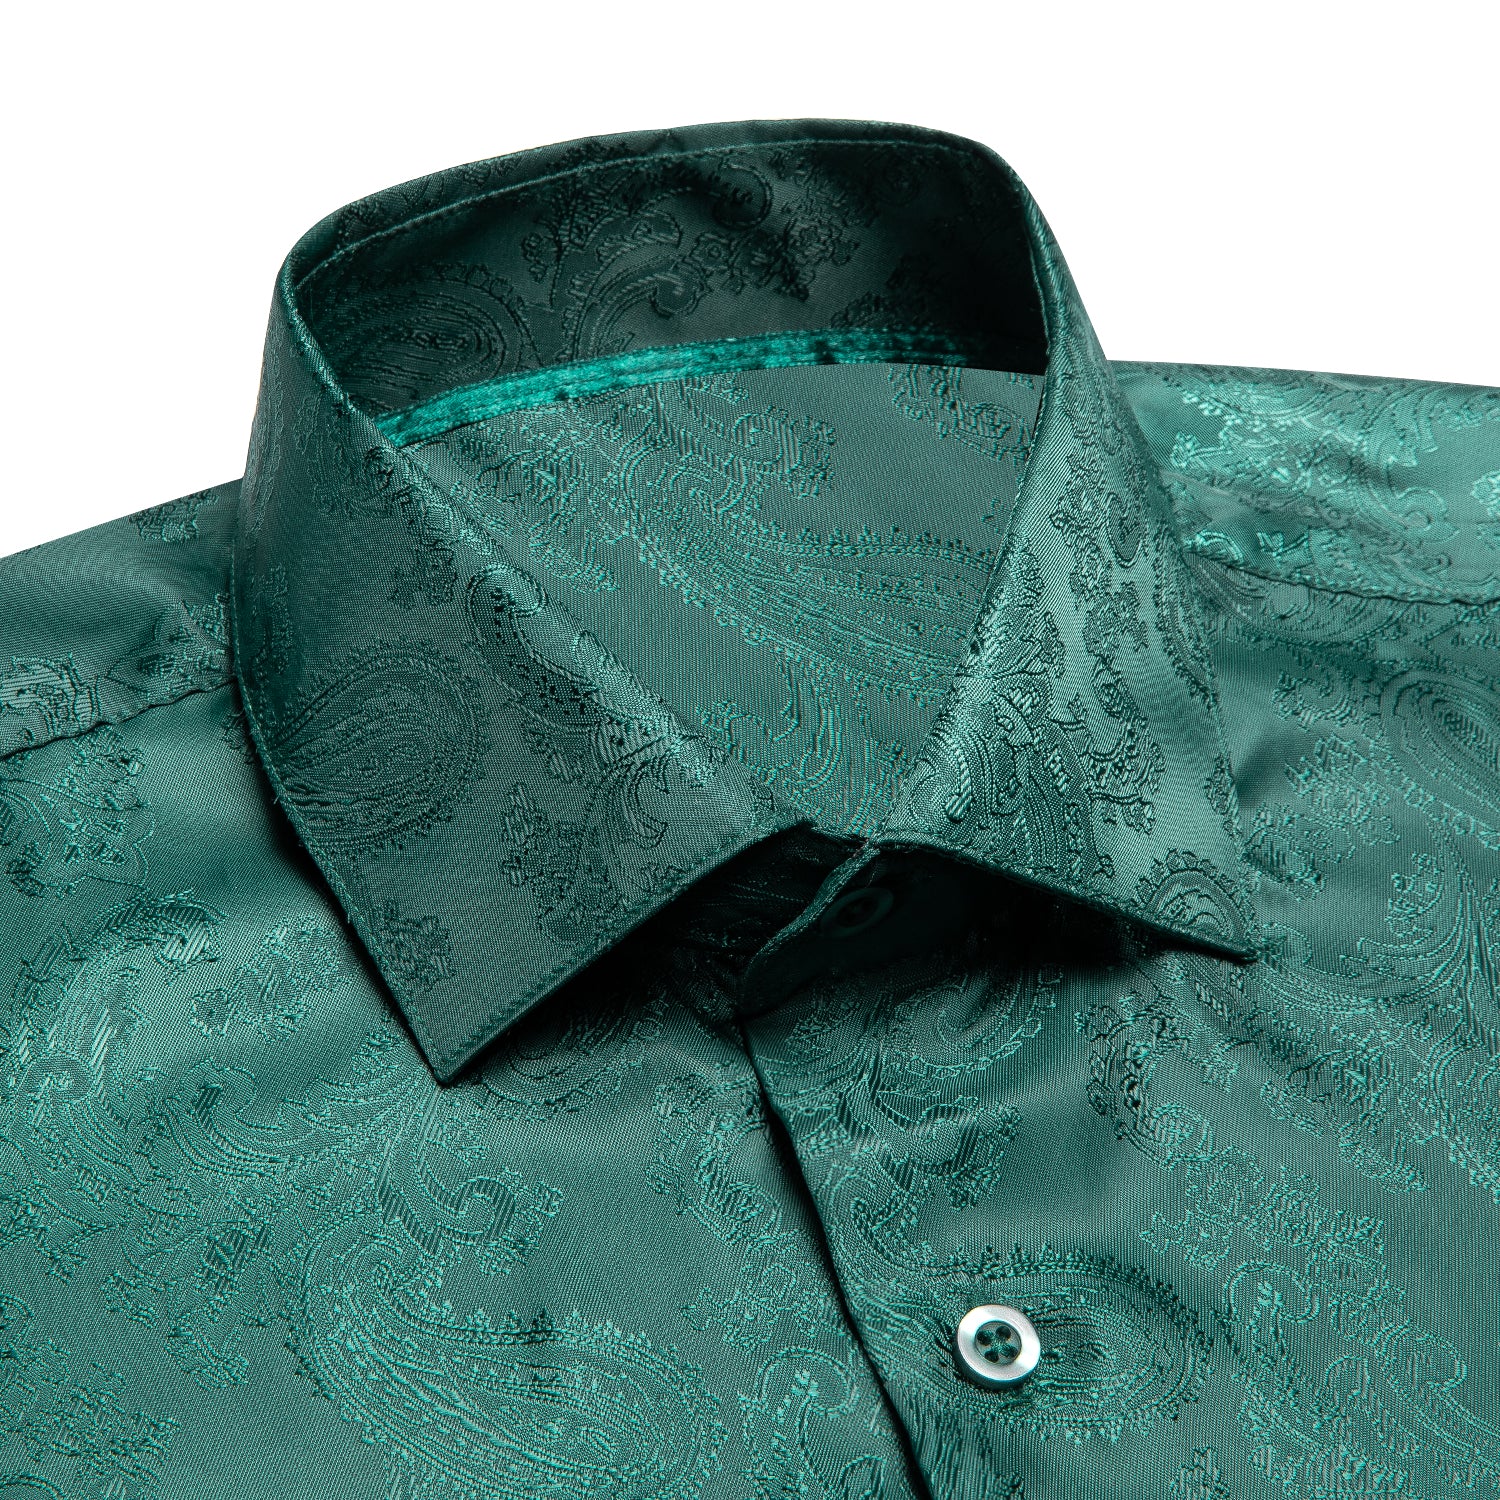 New Arrival Turquoise Green Paisley Silk Men's Shirt